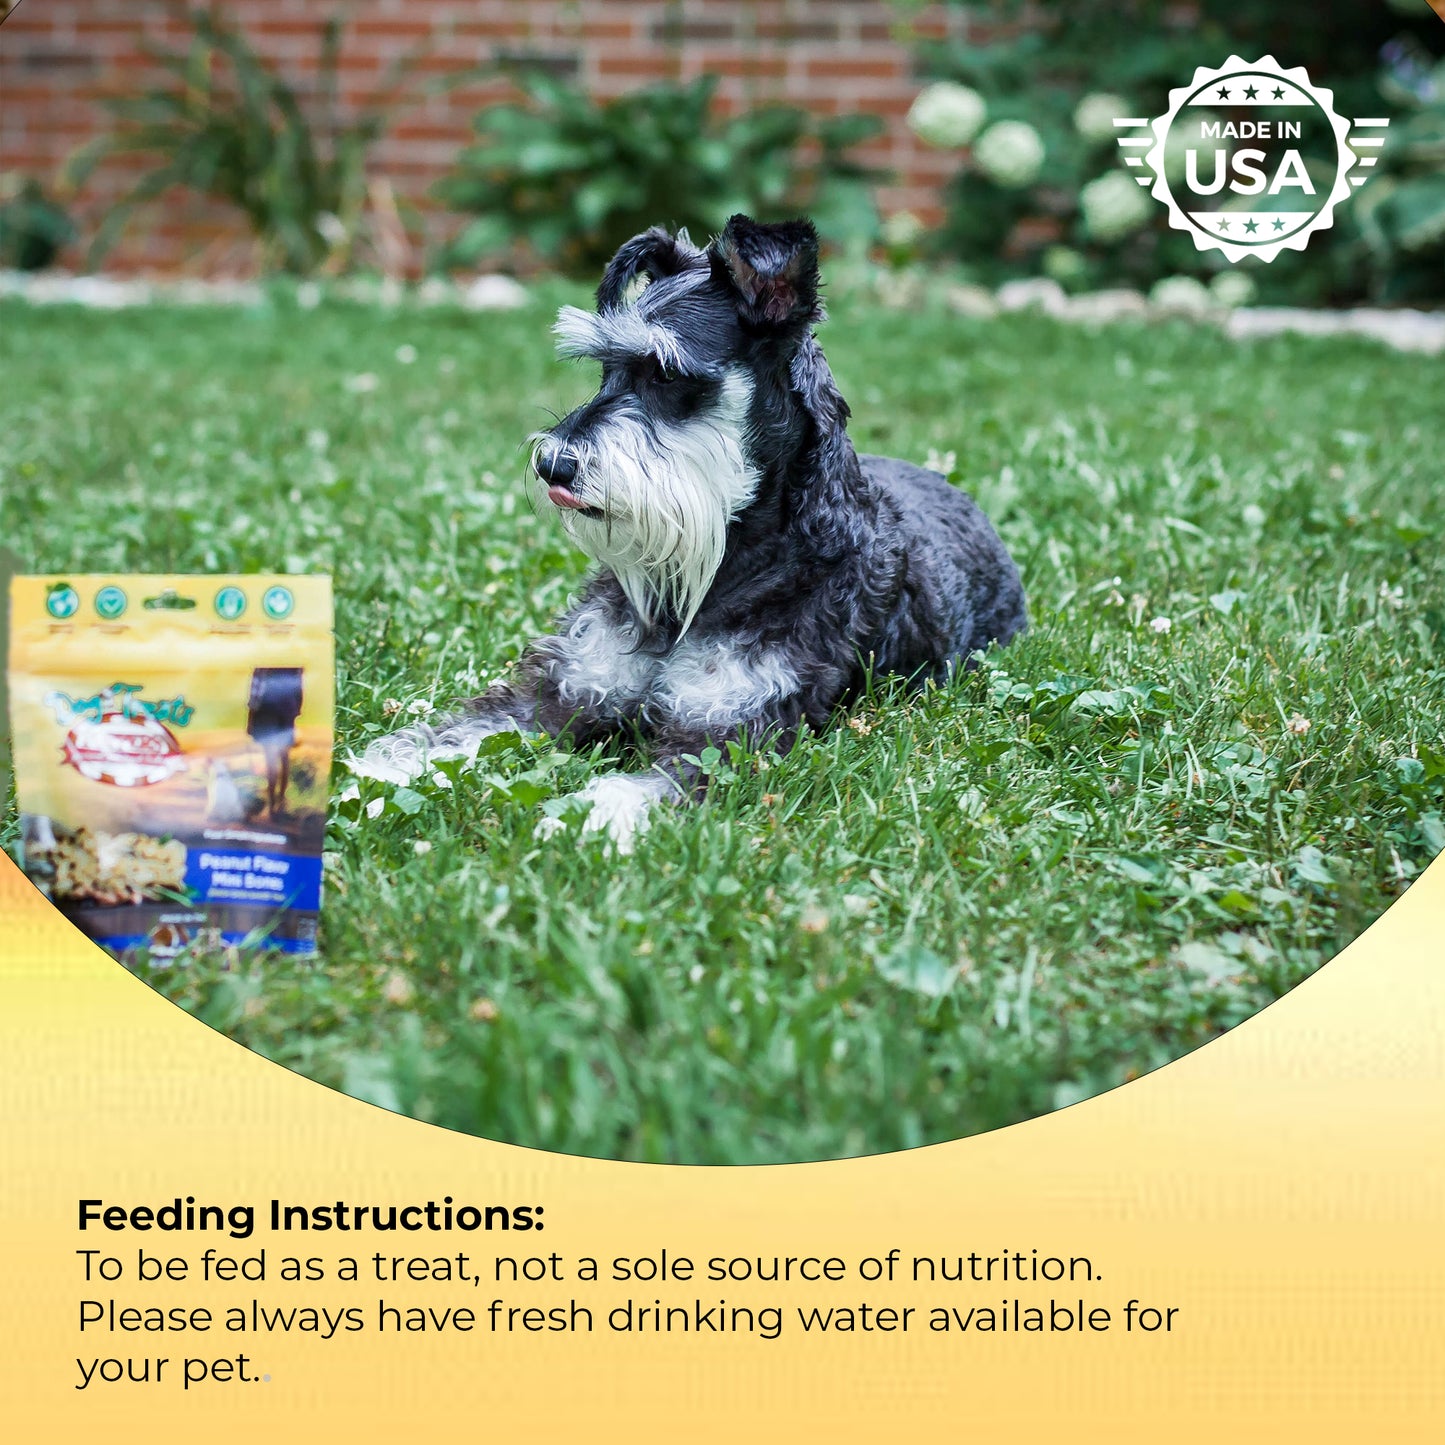 Feeding instructions: To be fed as a treat, not a sole source of nutrition. Please always have fresh drinking water available for your pet.